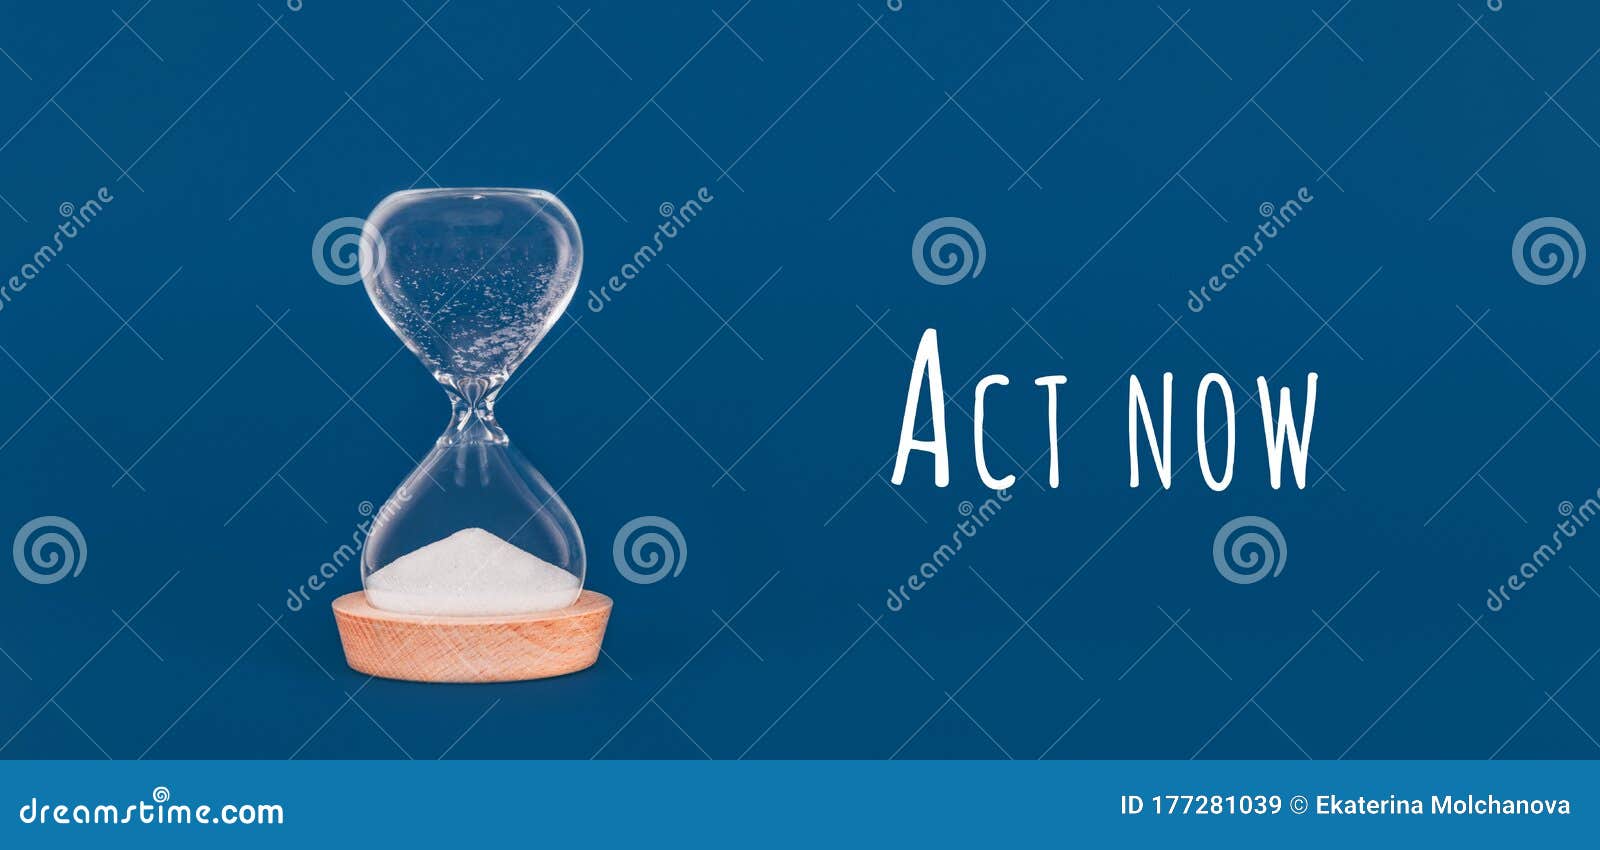 hourglass with the finished sand with act now wording. concept of time and timely actions